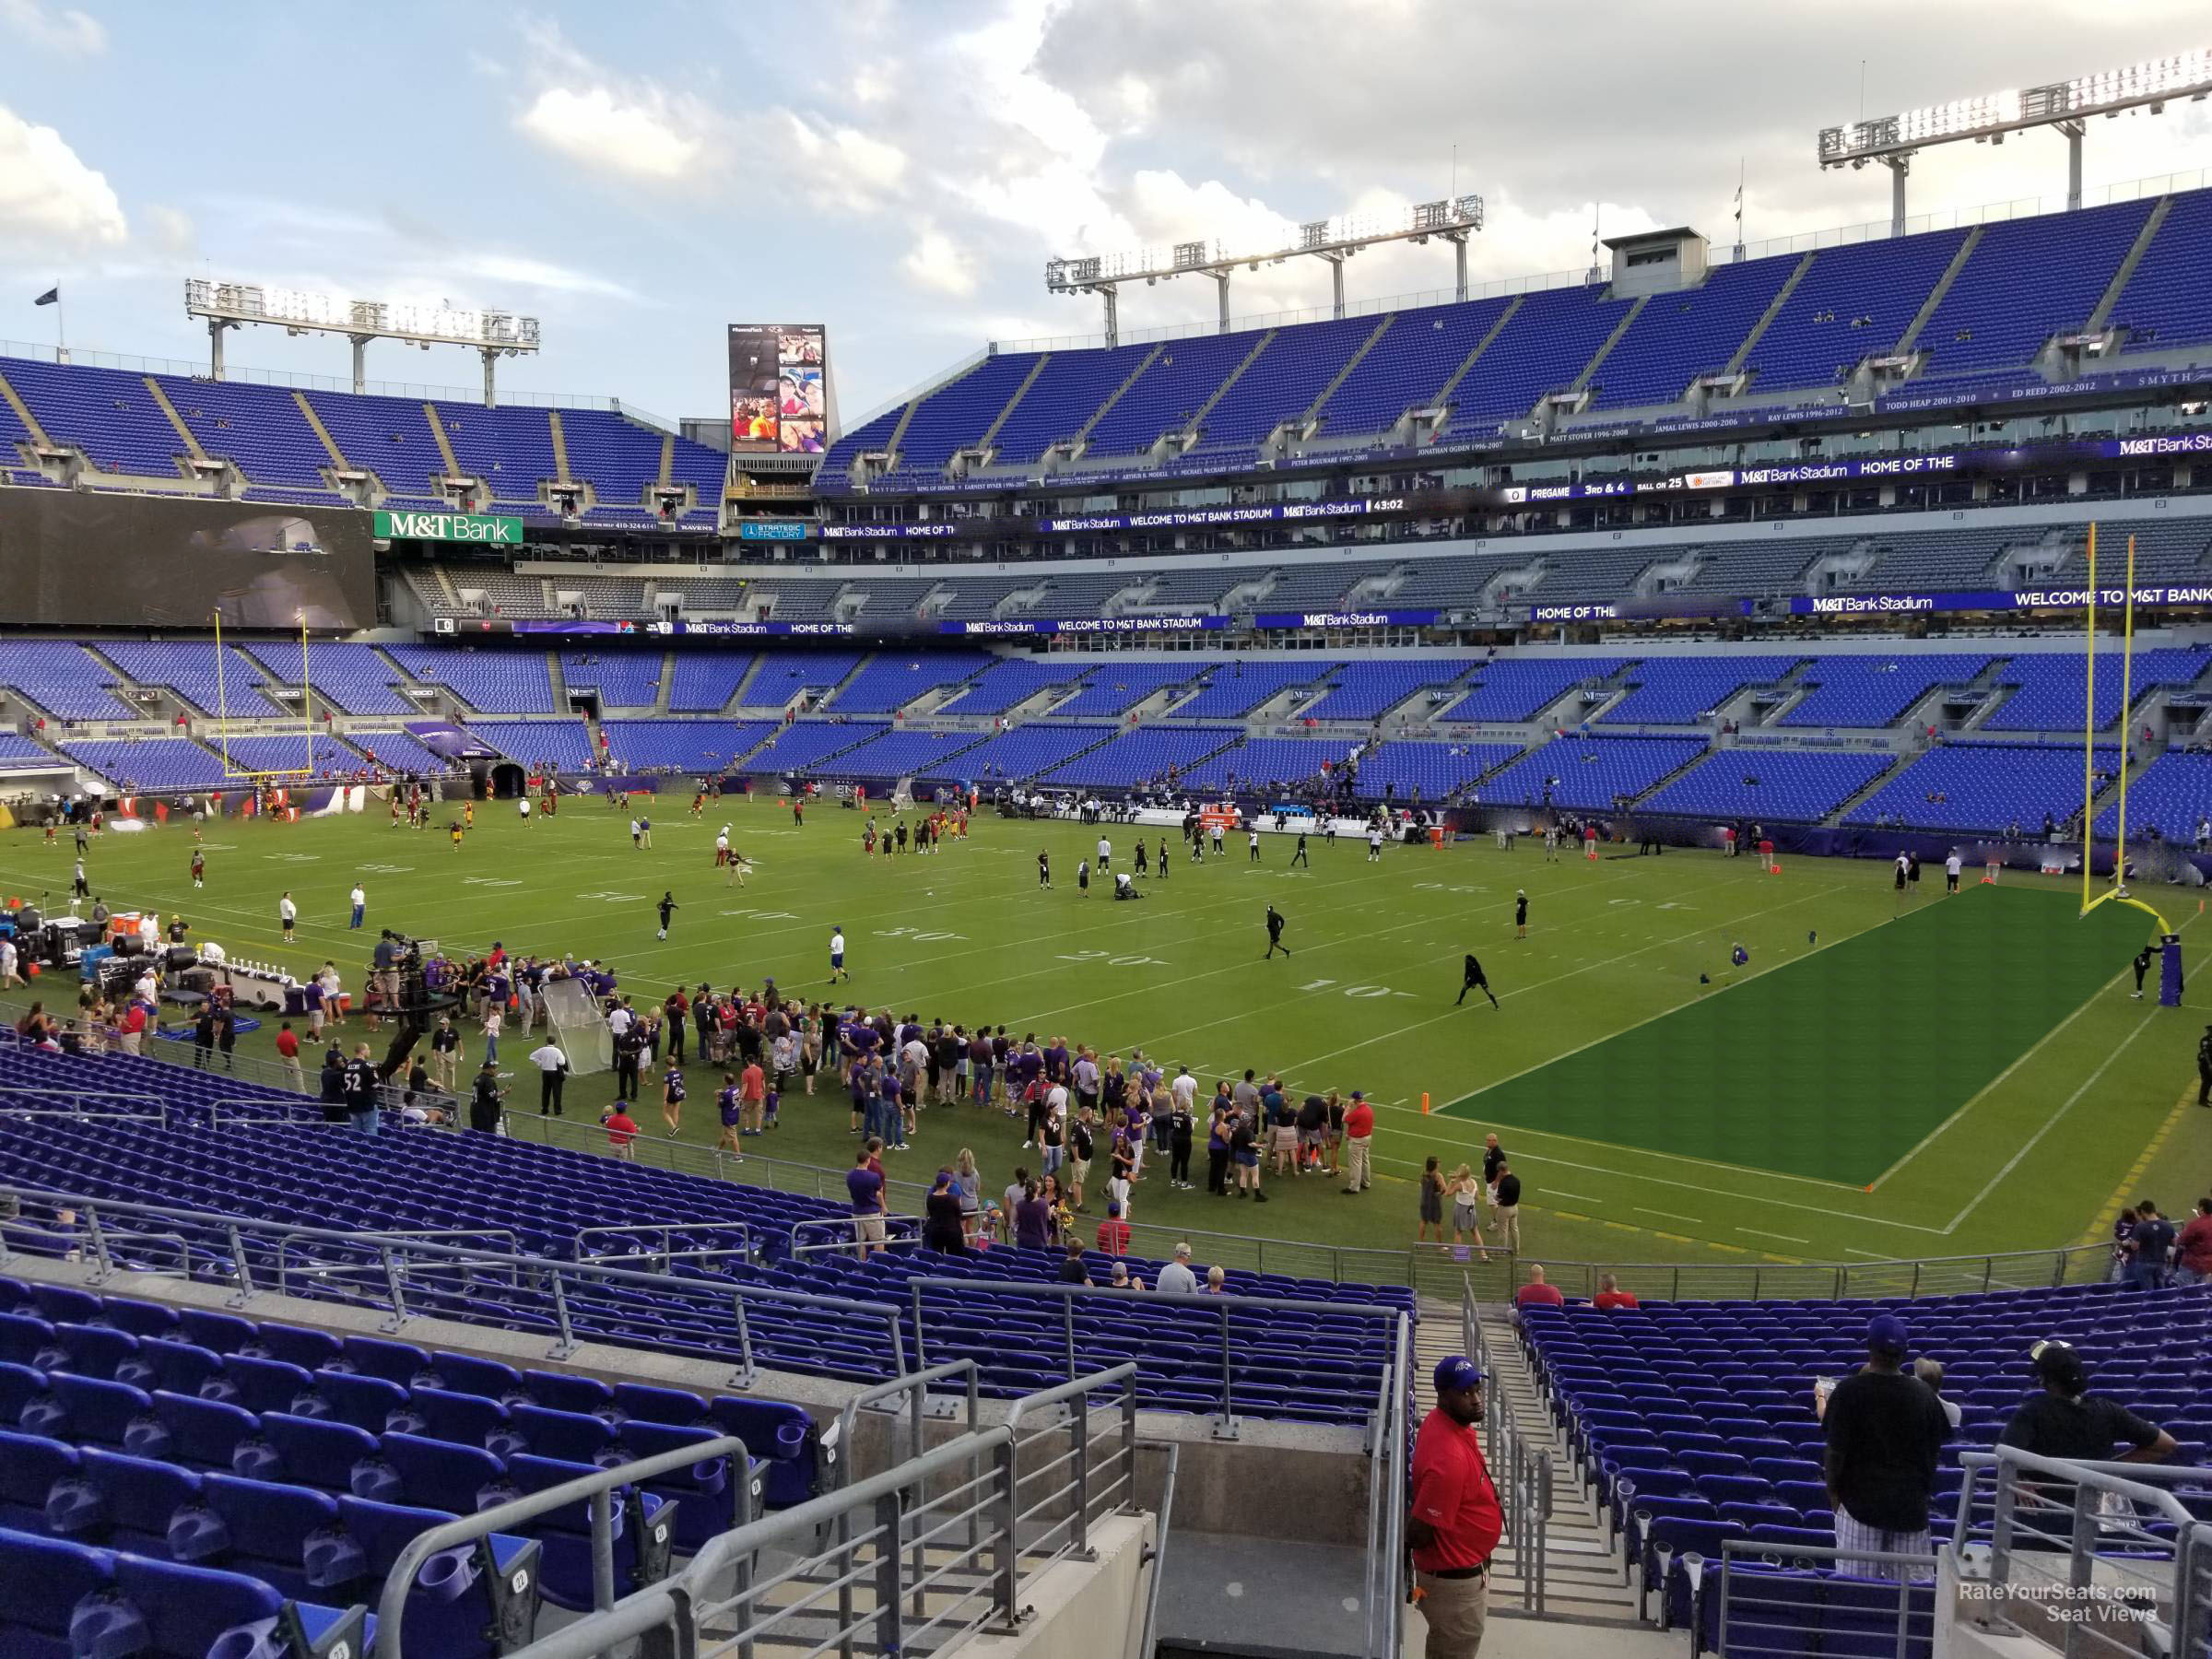 section 147, row 28 seat view  for football - m&t bank stadium